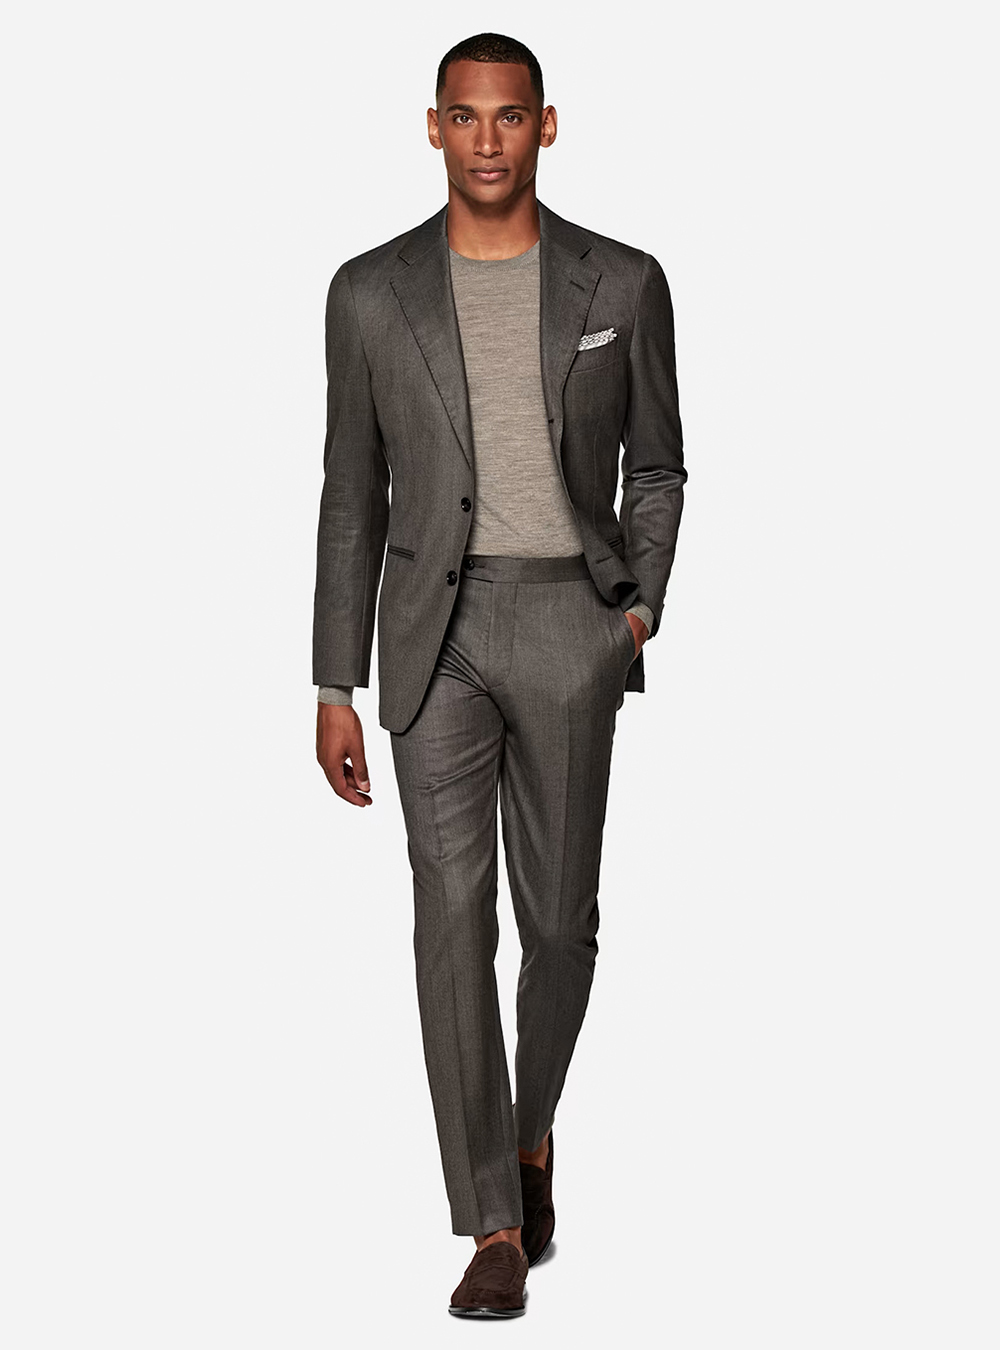 charcoal grey houndstooth suit, grey t-shirt, and brown suede loafers